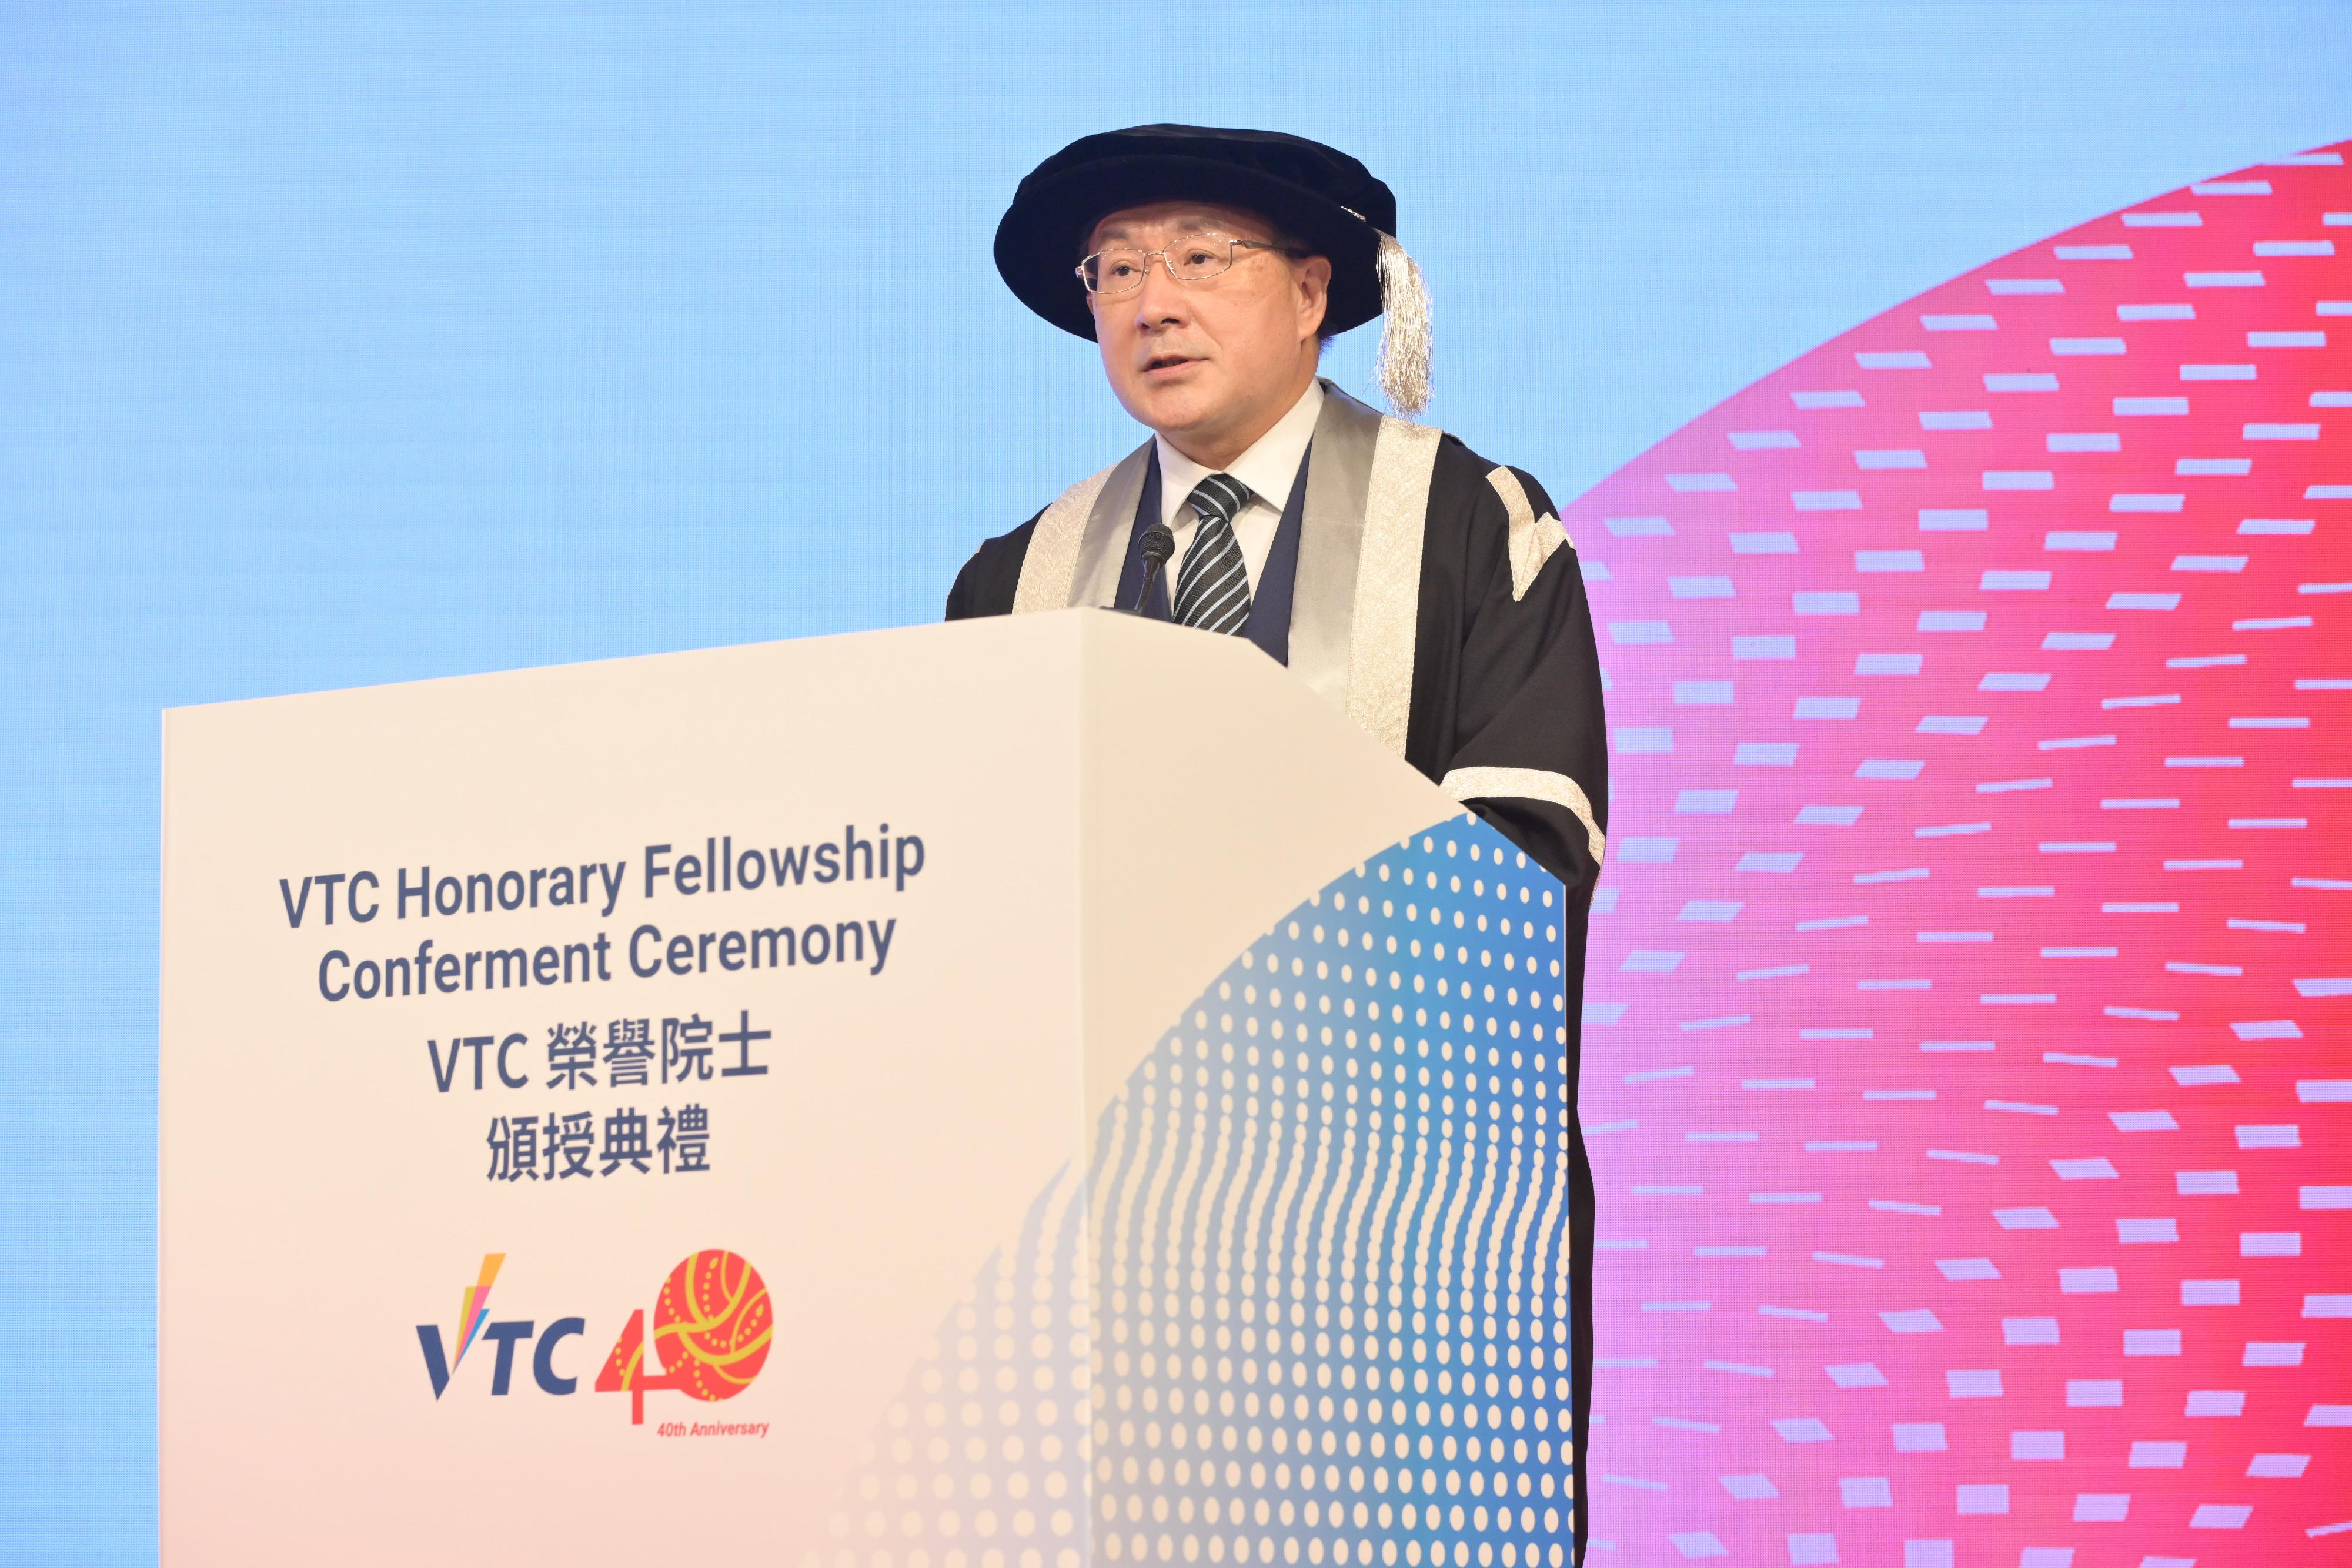 The Deputy Chief Secretary for Administration, Mr Cheuk Wing-hing, delivers a speech at the VTC Honorary Fellowship Conferment Ceremony today (September 28).